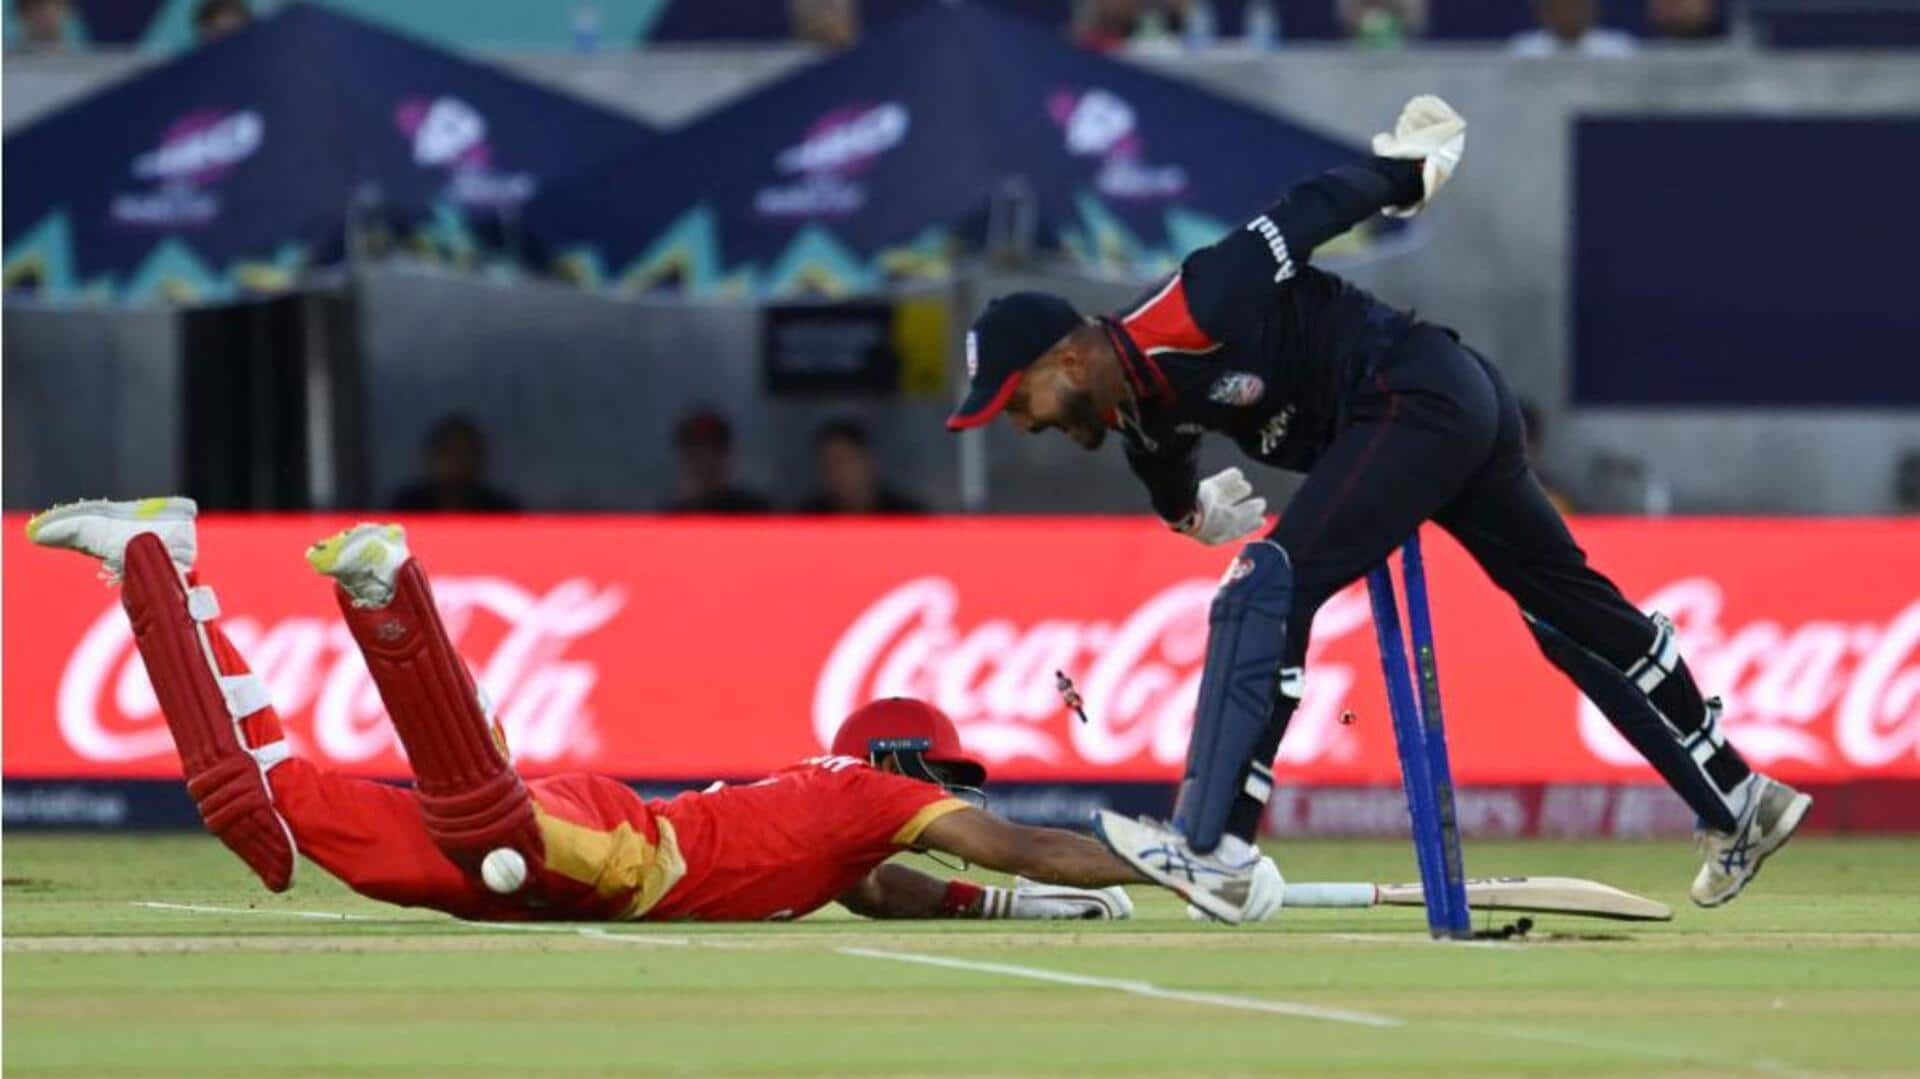 USA thrash Canada in T20 World Cup opener: Key stats